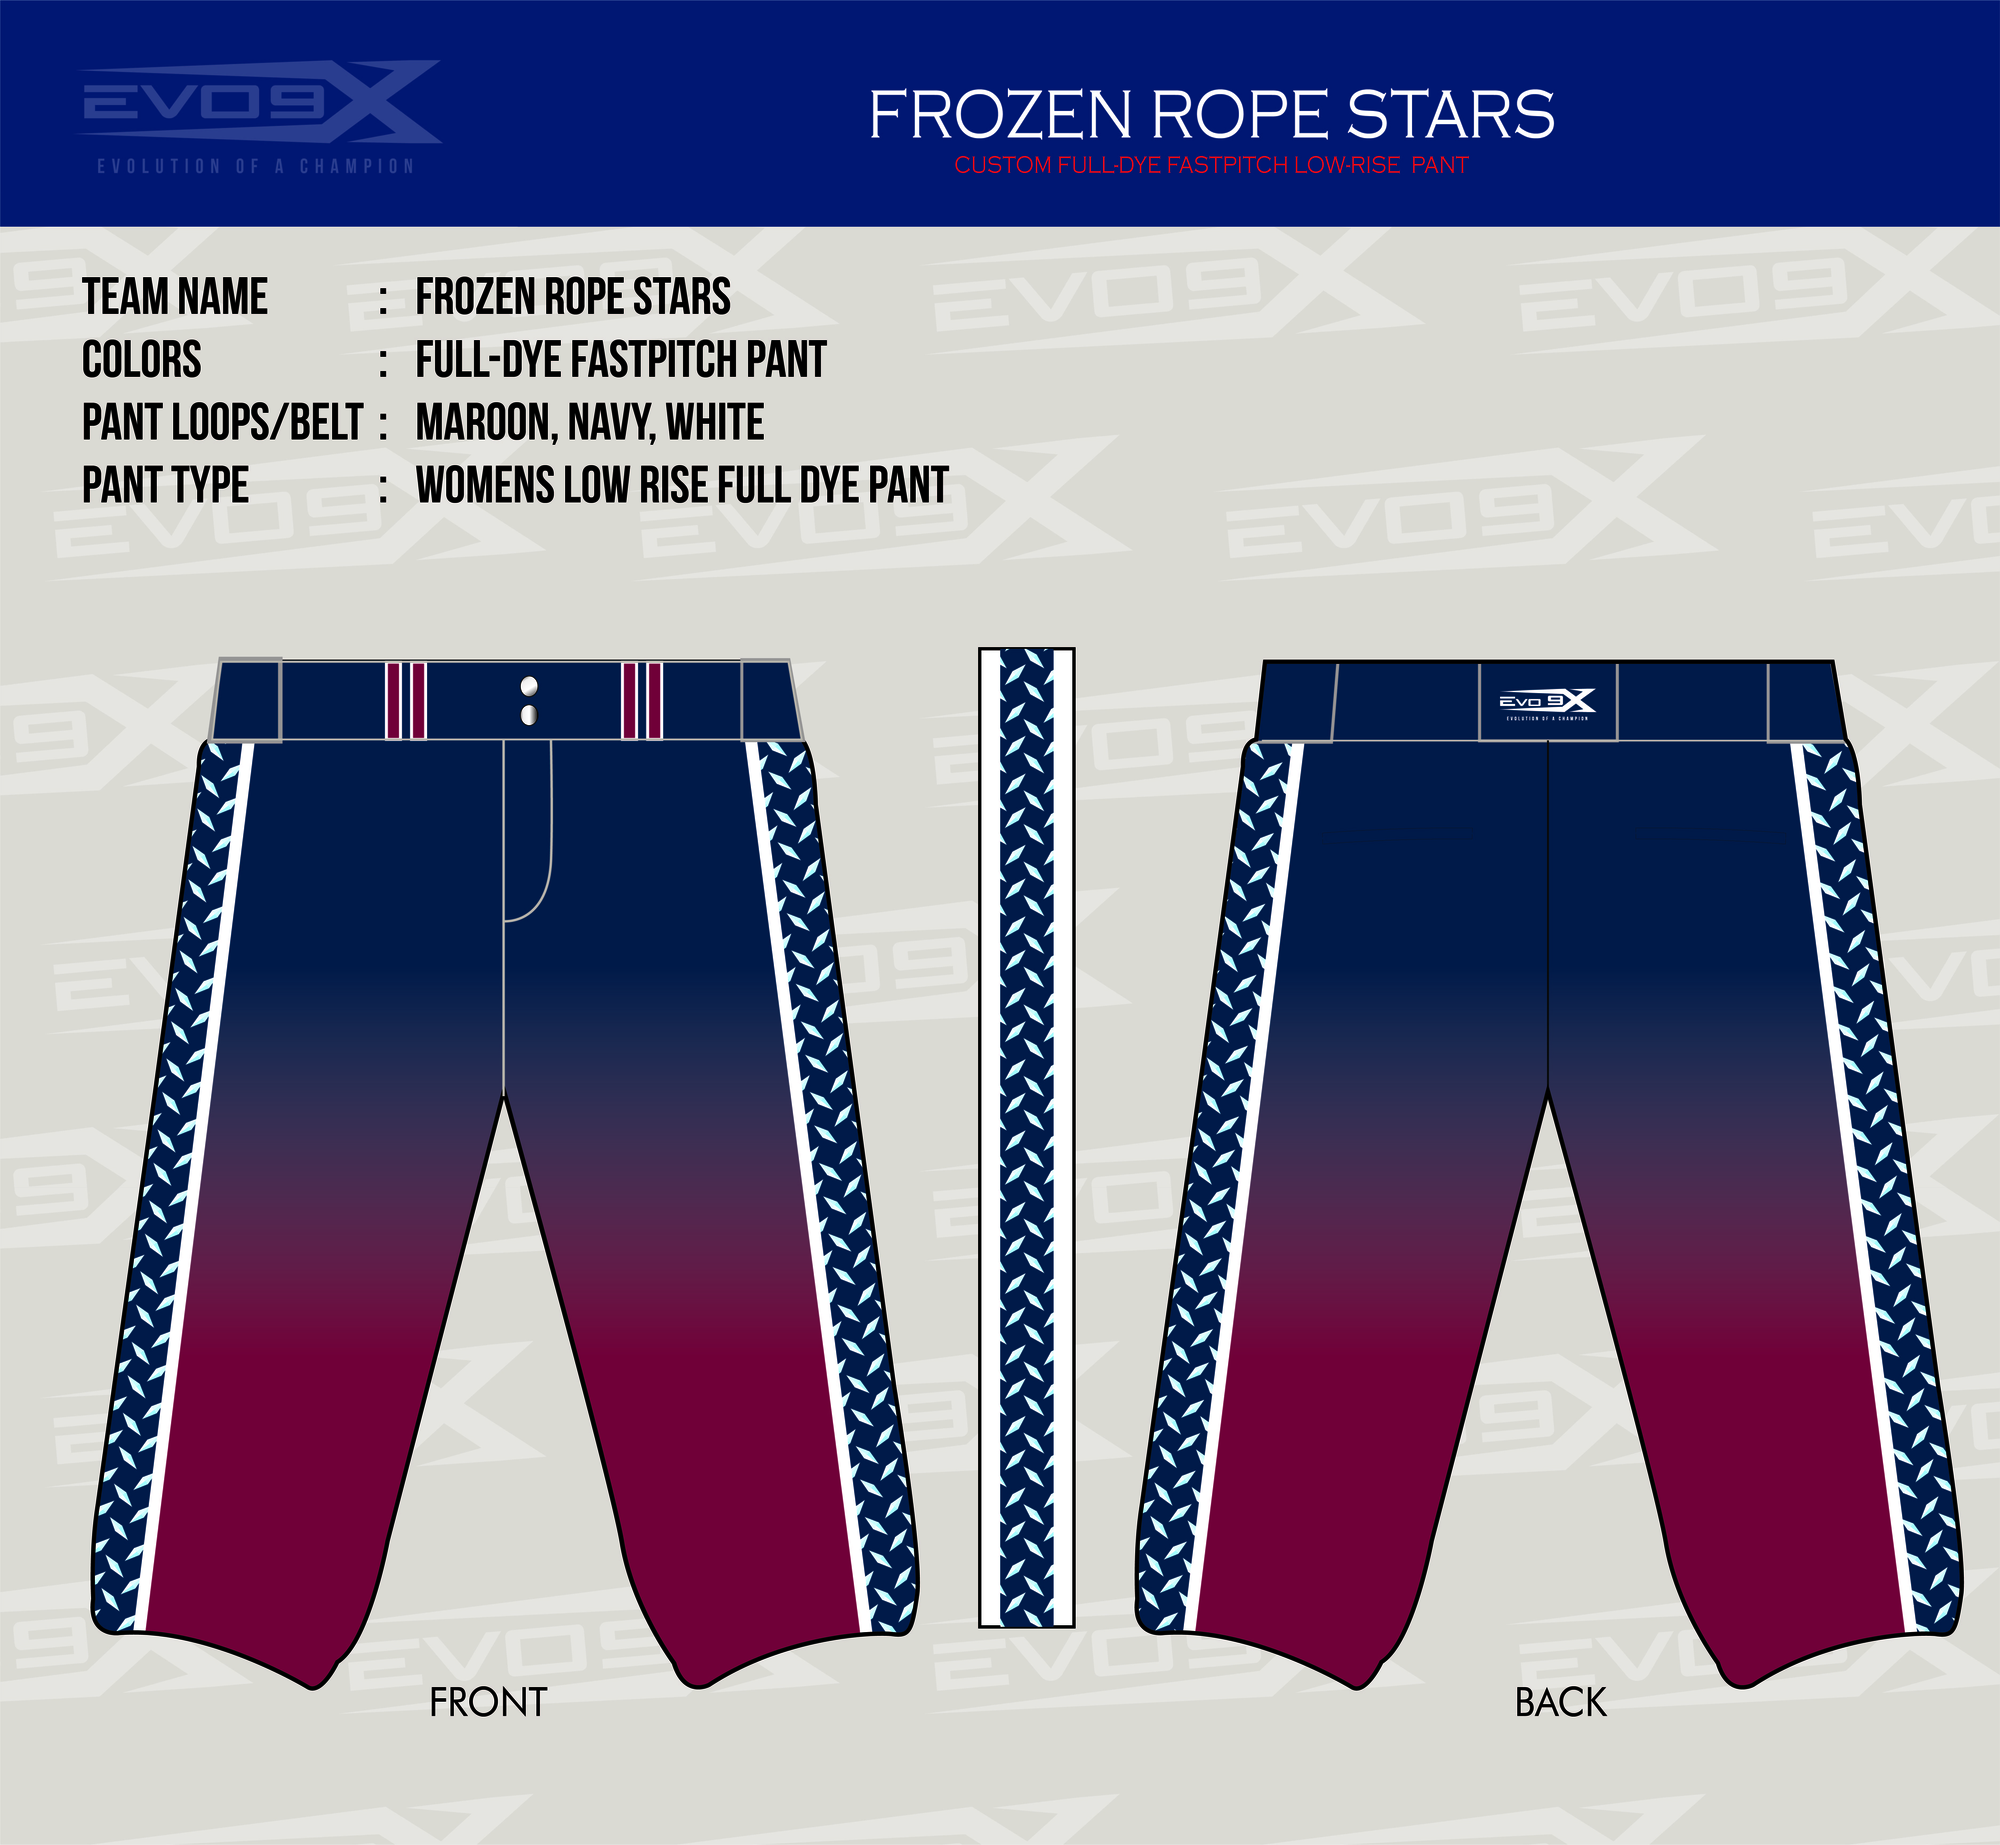 Evo9x FROZEN ROPES STARS Fastpitch Women's Full Dye Sublimated Pants